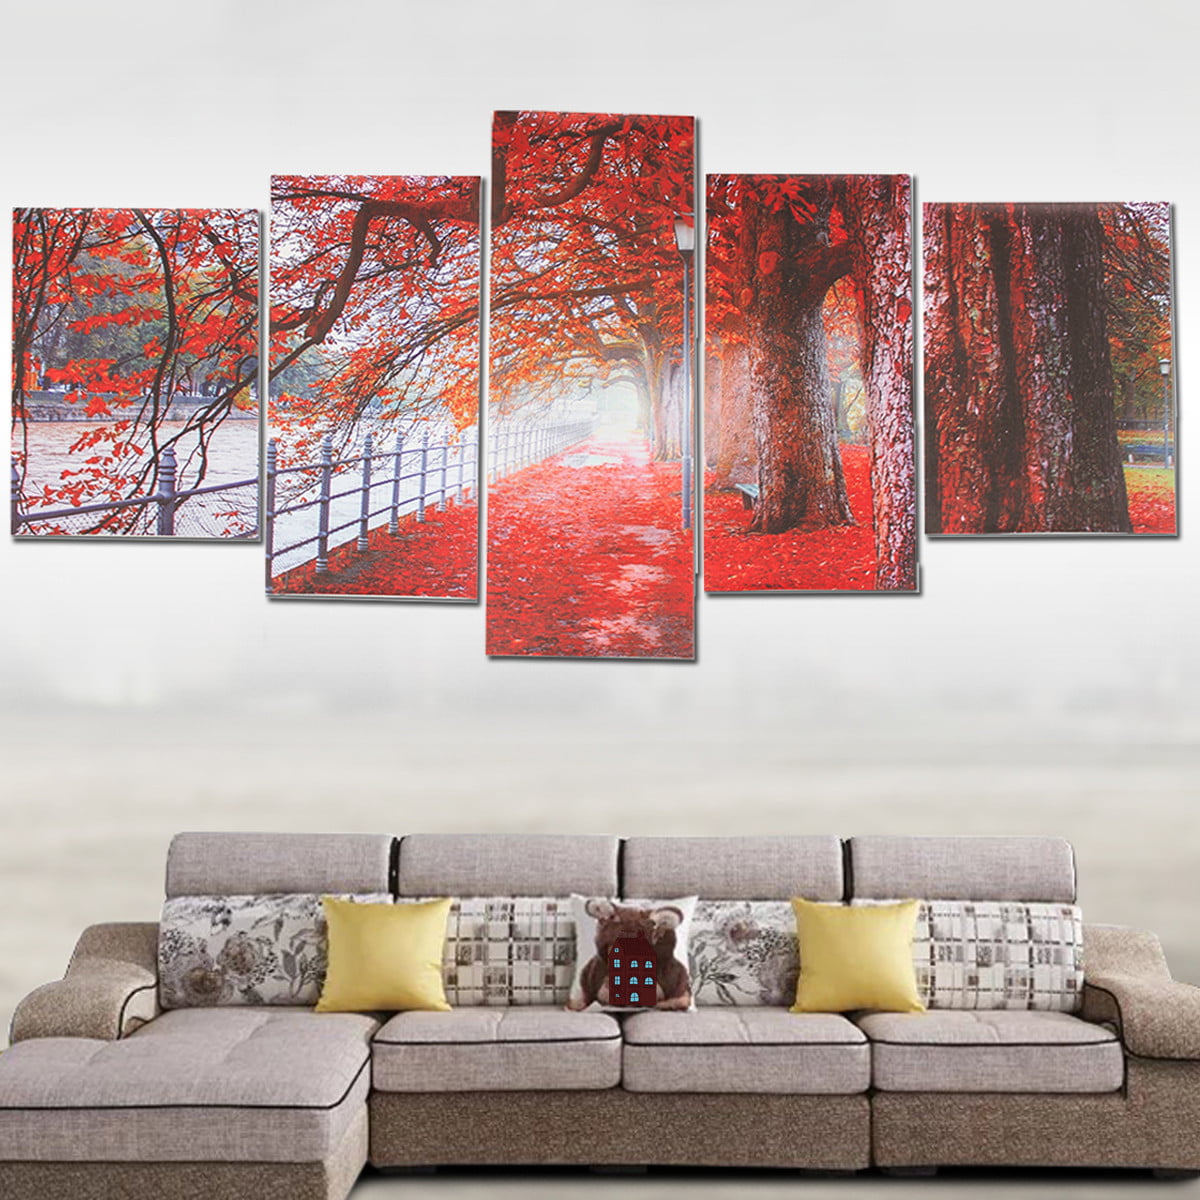 5Pcs Red Tree Modern Canvas Oil Painting Wall Art Home Picture Print Decor Gift 